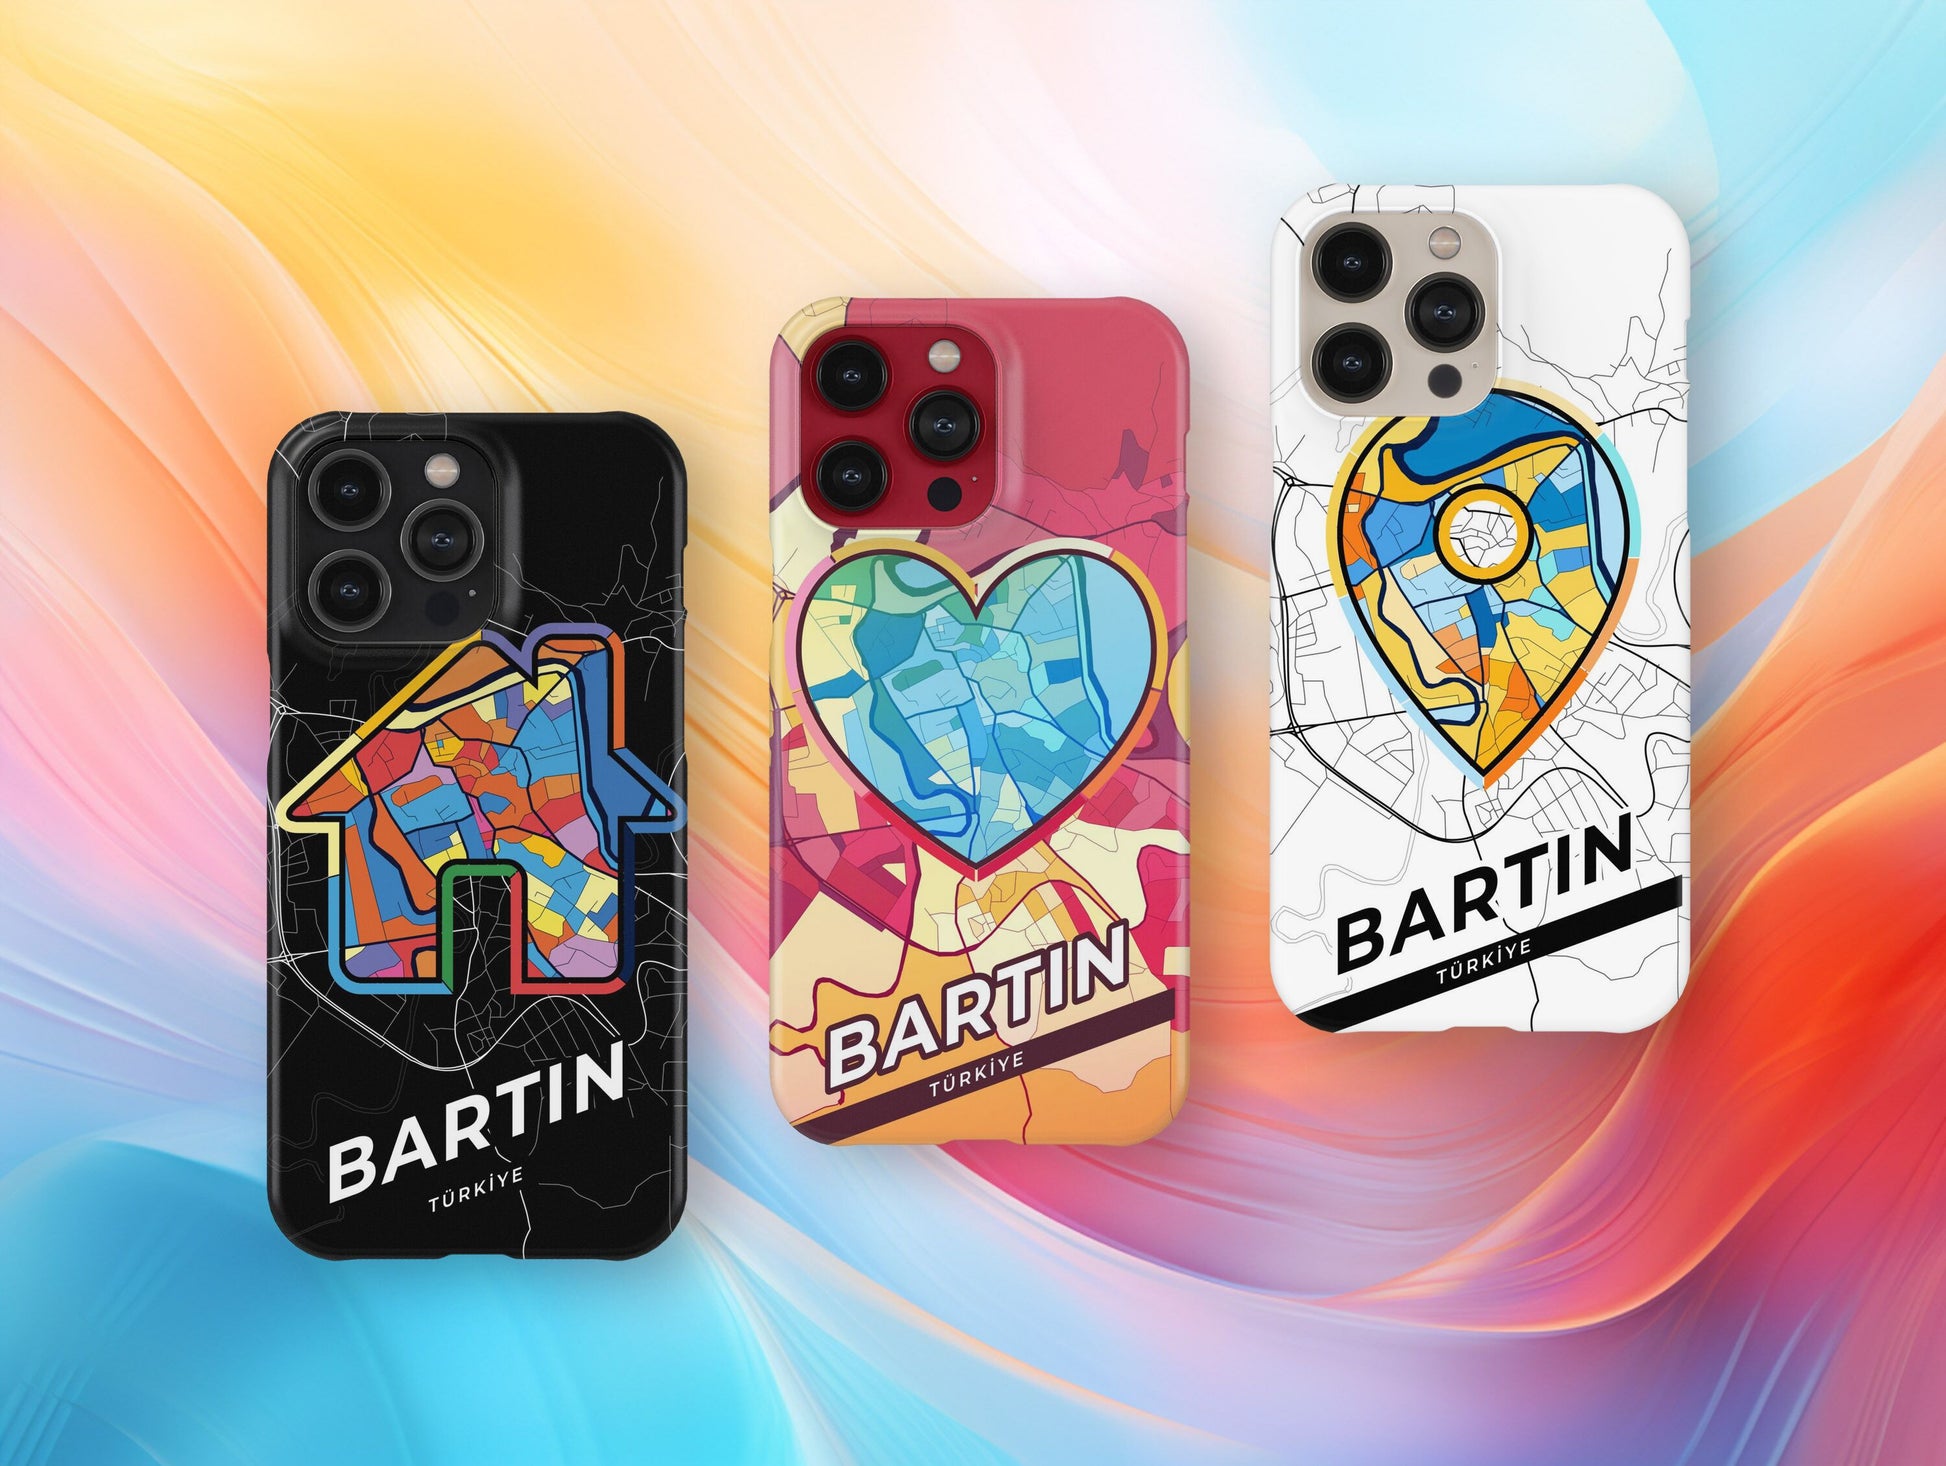 Bartın Turkey slim phone case with colorful icon. Birthday, wedding or housewarming gift. Couple match cases.